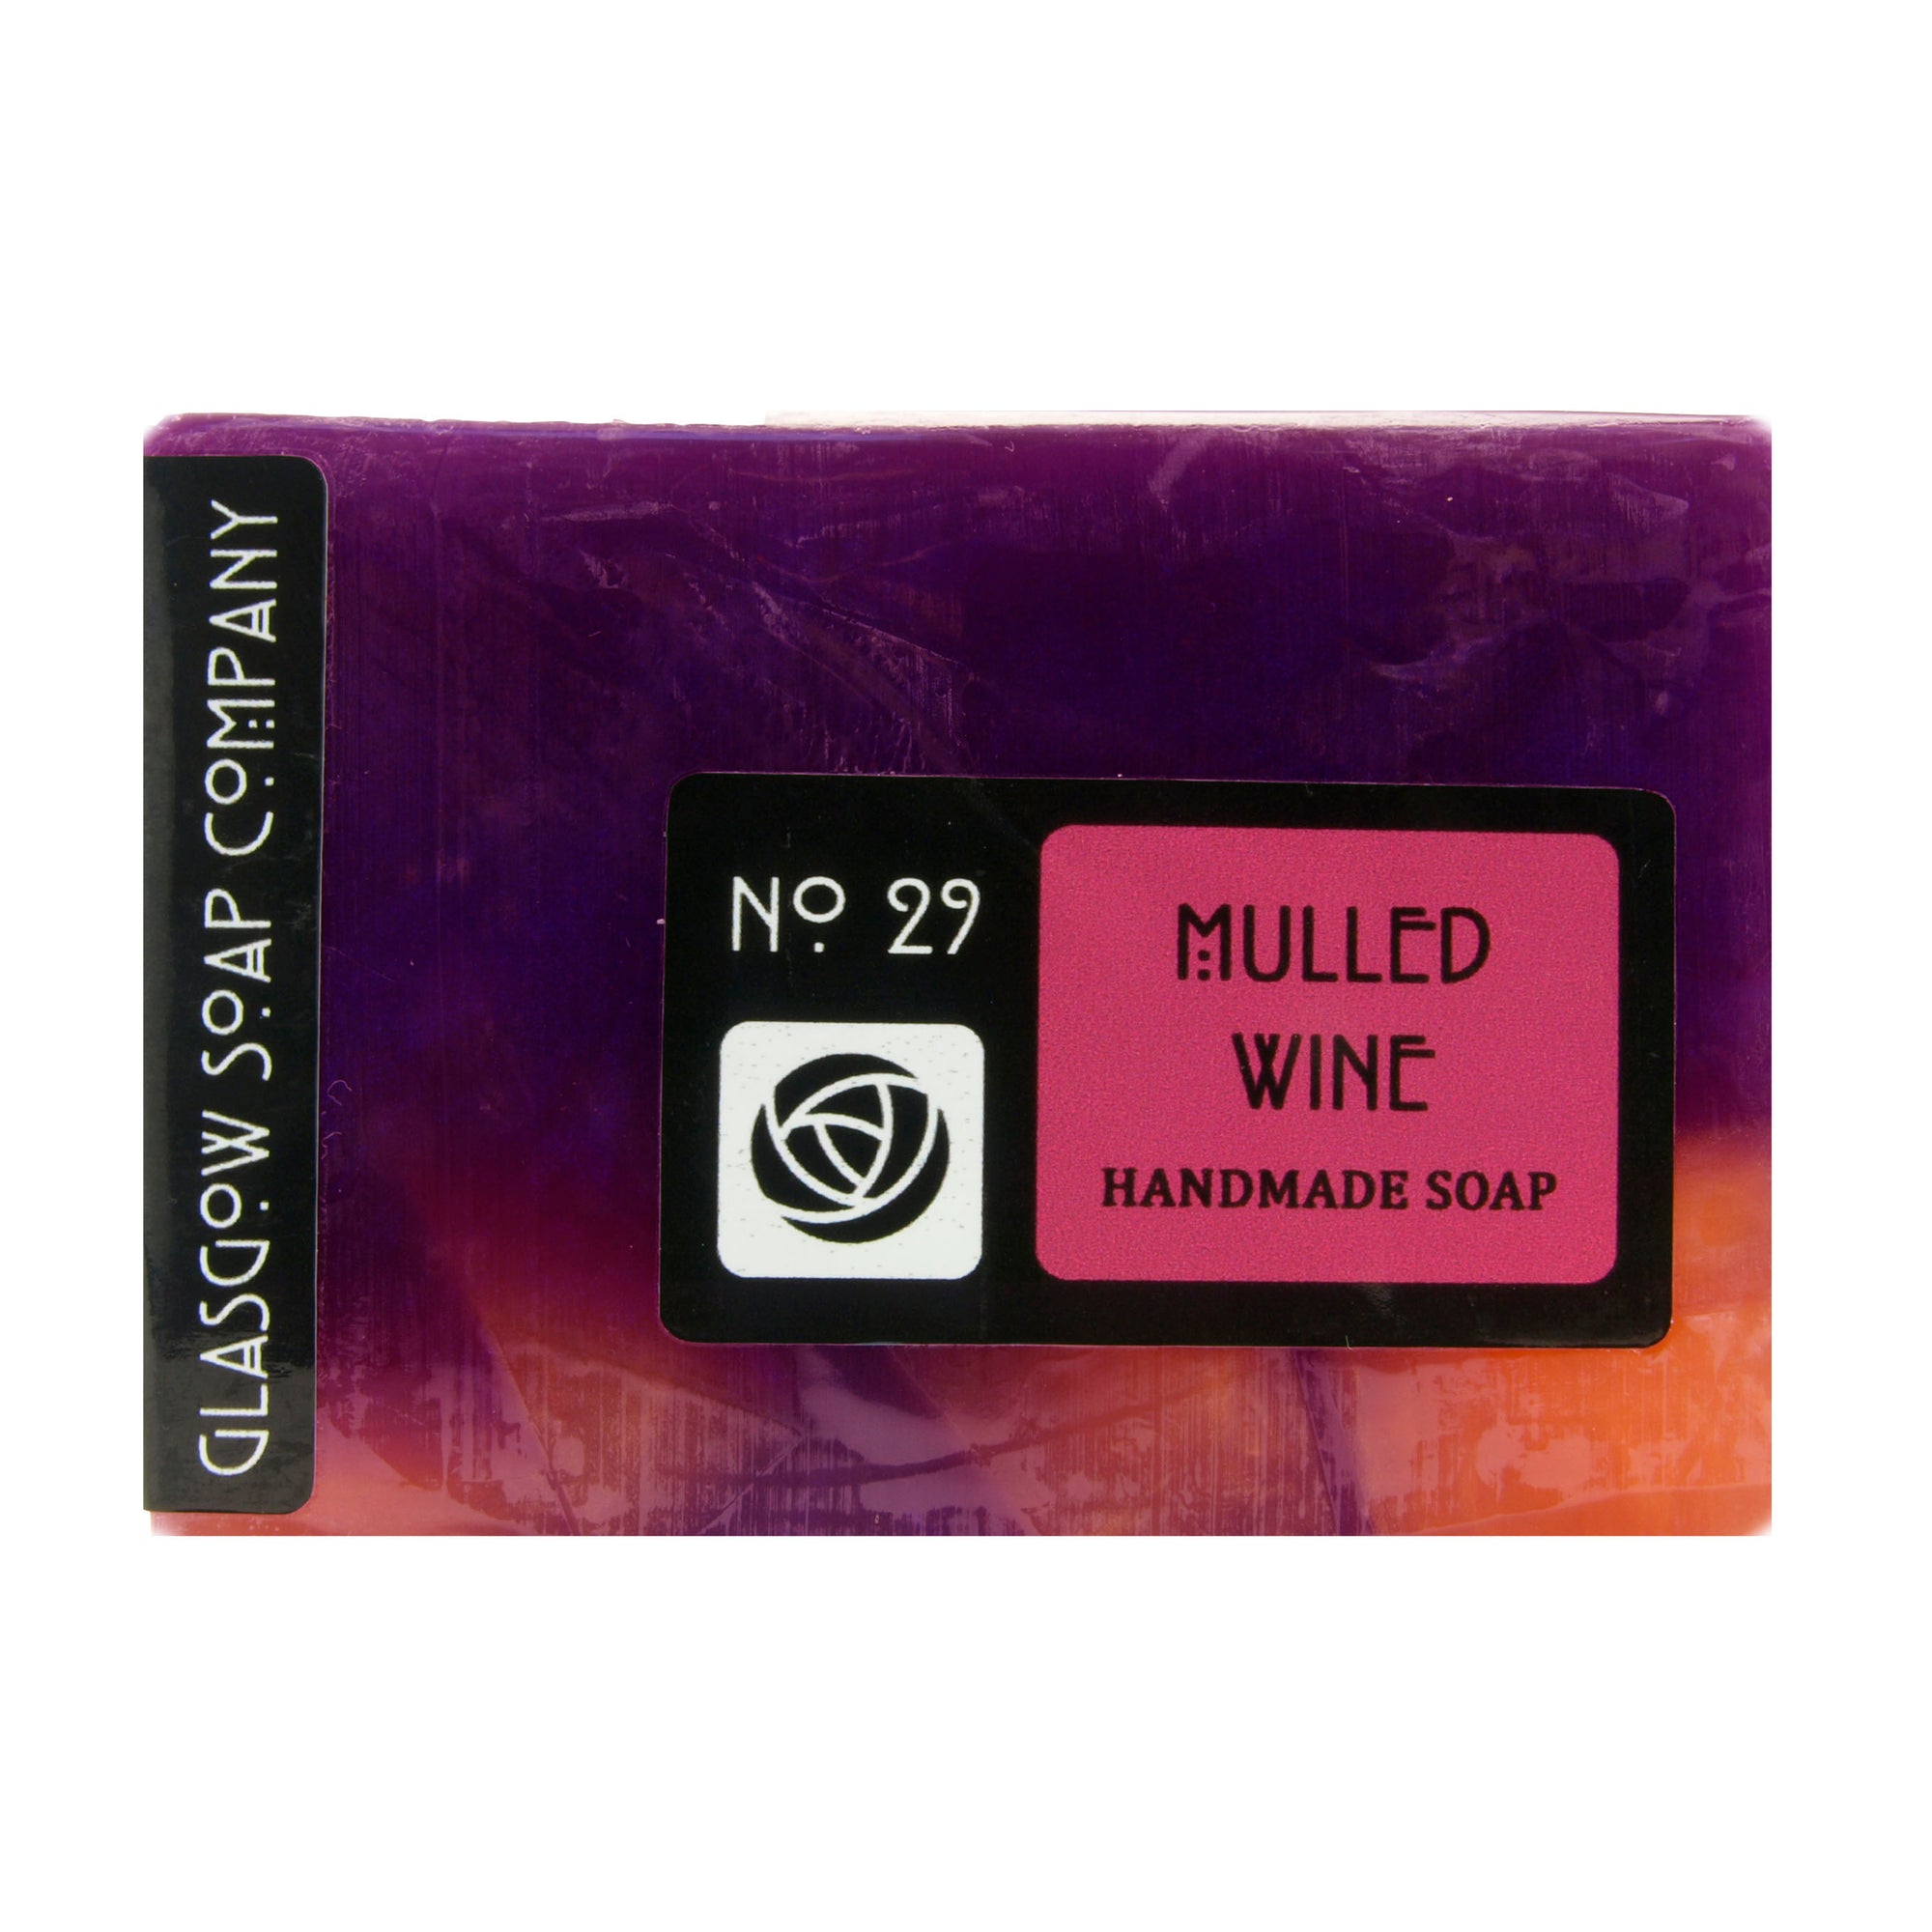 Mulled Wine Christmas Scented Soap Slice by penny black